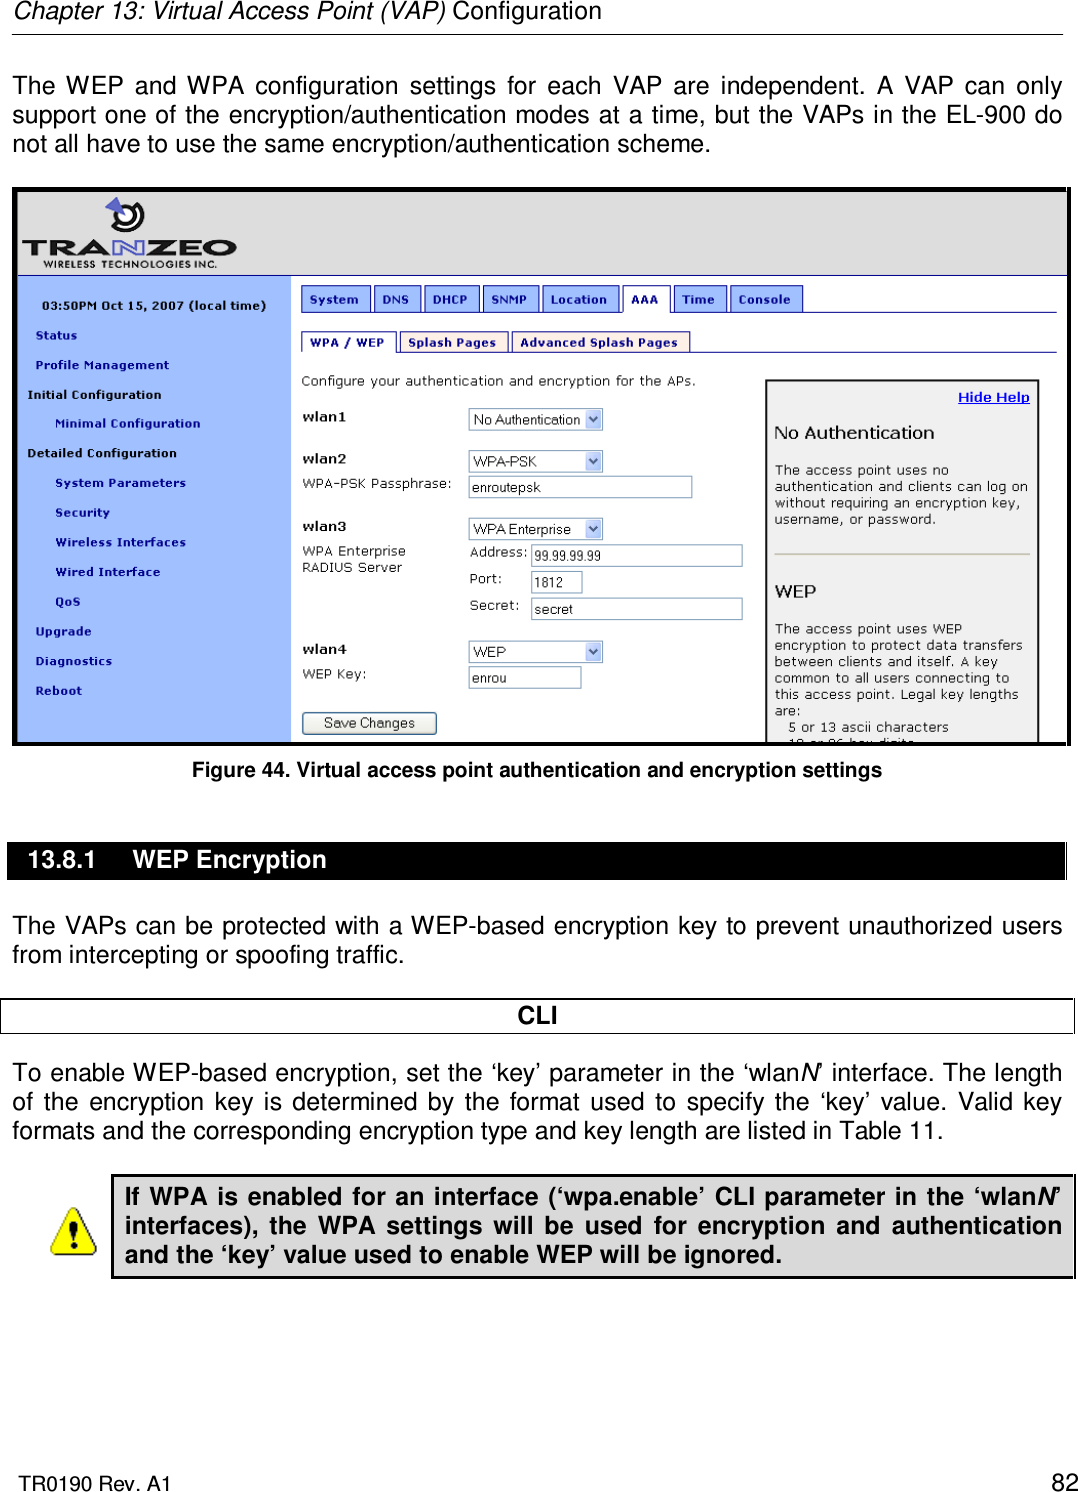 Chapter 13: Virtual Access Point (VAP) Configuration  TR0190 Rev. A1    82 The  WEP  and  WPA  configuration  settings  for  each  VAP  are  independent.  A  VAP  can  only support one of the encryption/authentication modes at a time, but the VAPs in the EL-900 do not all have to use the same encryption/authentication scheme.   Figure 44. Virtual access point authentication and encryption settings 13.8.1  WEP Encryption The VAPs can be protected with a WEP-based encryption key to prevent unauthorized users from intercepting or spoofing traffic.   CLI To enable WEP-based encryption, set the ‘key’ parameter in the ‘wlanN’ interface. The length of  the  encryption  key is  determined  by  the  format  used  to  specify  the  ‘key’  value.  Valid  key formats and the corresponding encryption type and key length are listed in Table 11.  If WPA is enabled for an interface (‘wpa.enable’ CLI parameter in the ‘wlanN’ interfaces),  the  WPA  settings  will  be  used  for  encryption  and  authentication and the ‘key’ value used to enable WEP will be ignored.  